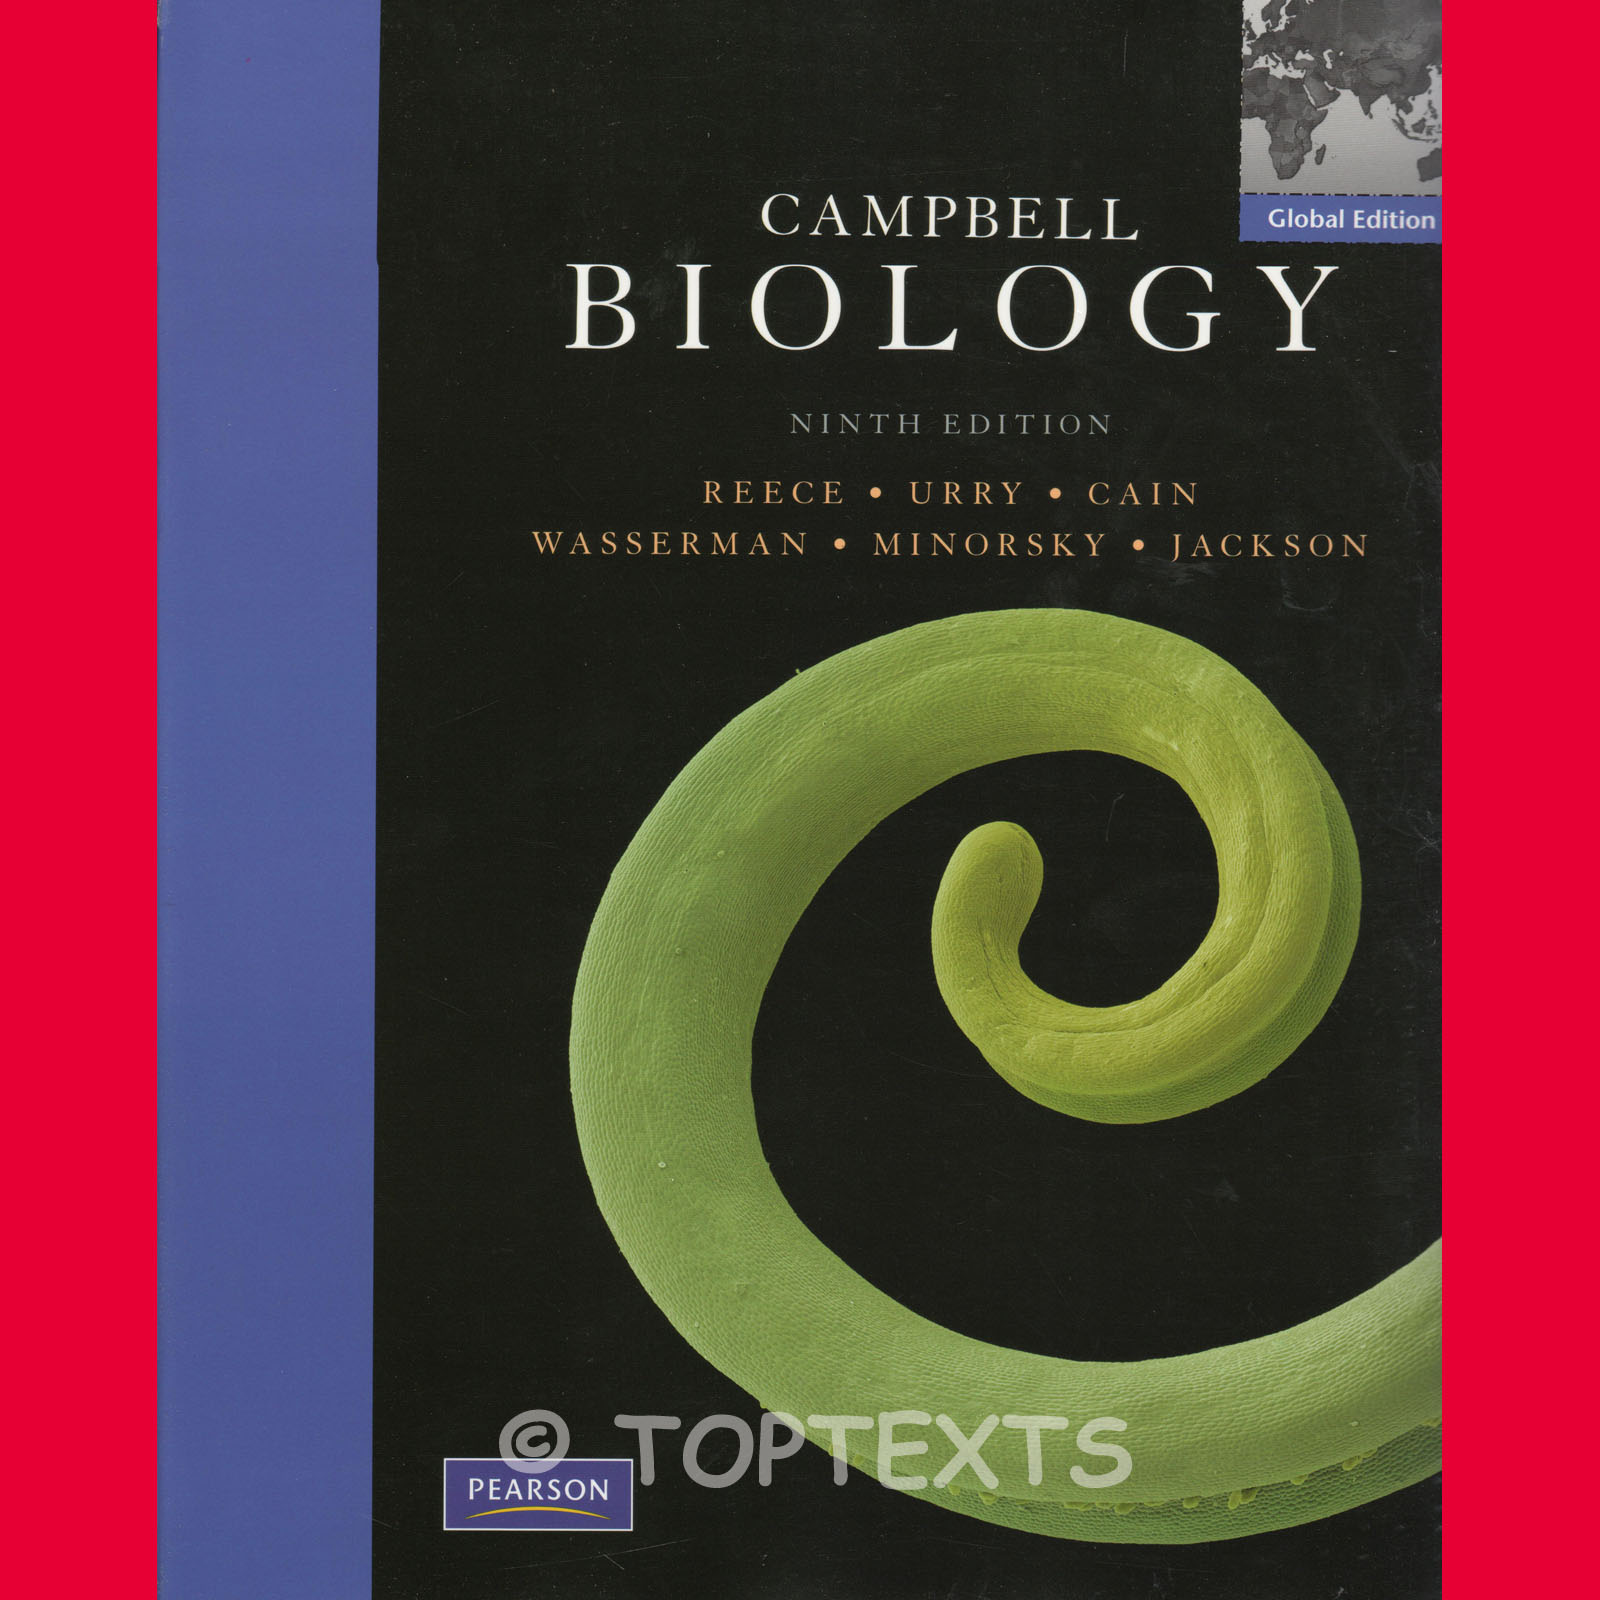 Campbell Biology 9th Edition Test Bank Pdf Torrent.zip